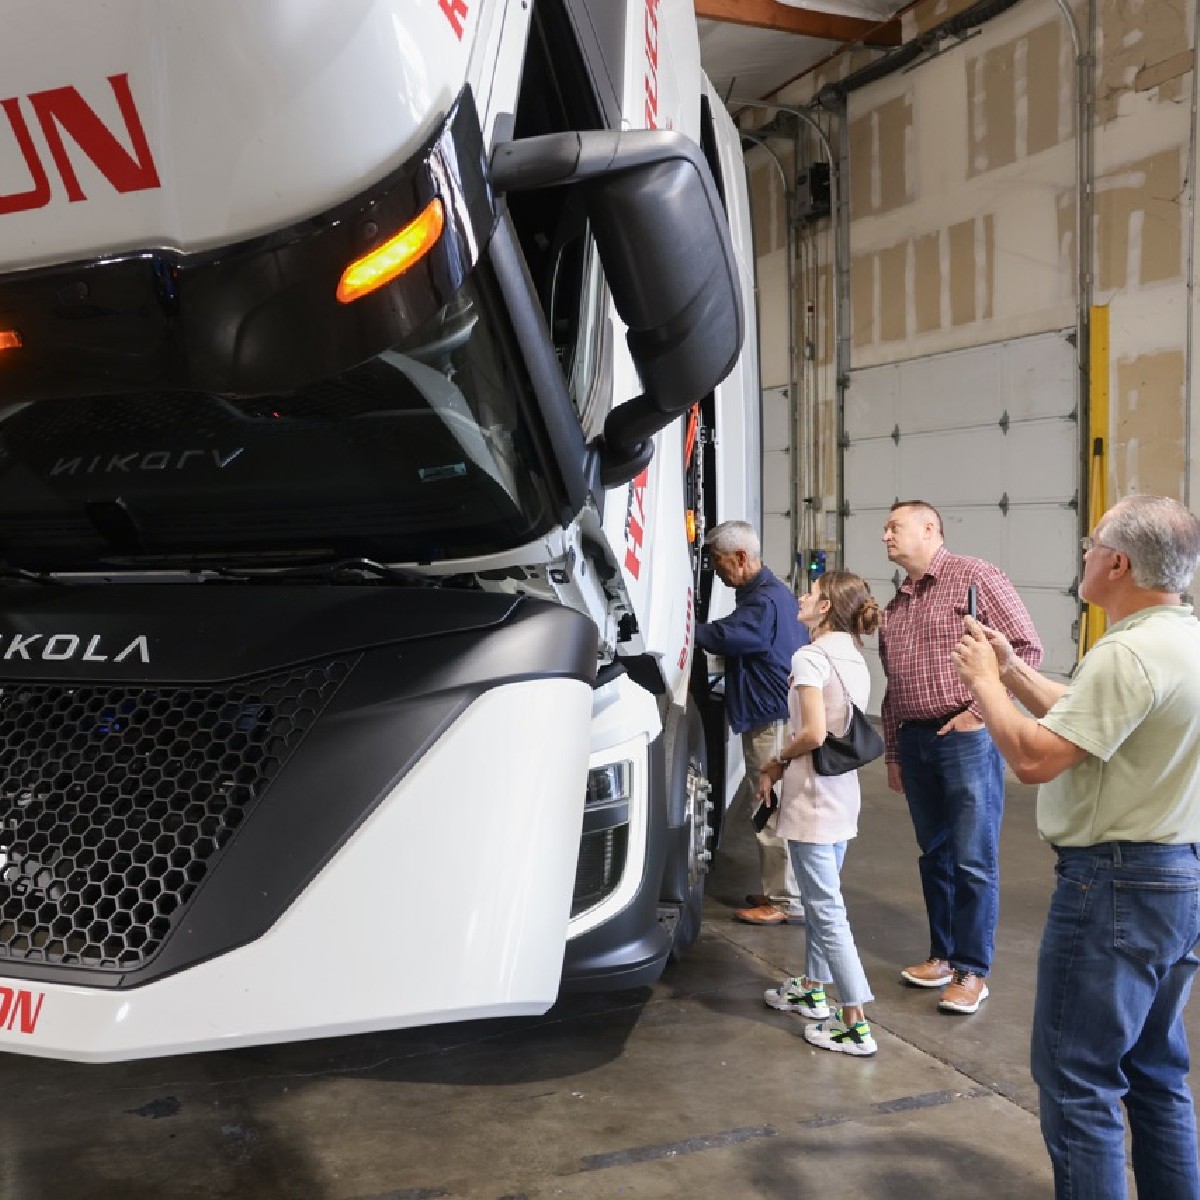 Thank you again to our partners, supporters, and attendees for making our #Stockton Ribbon Cutting and Open House a success. Together, we're driving toward a cleaner future for commercial transport. Stay tuned for more exciting updates and events from #ETHERO Truck + Energy!